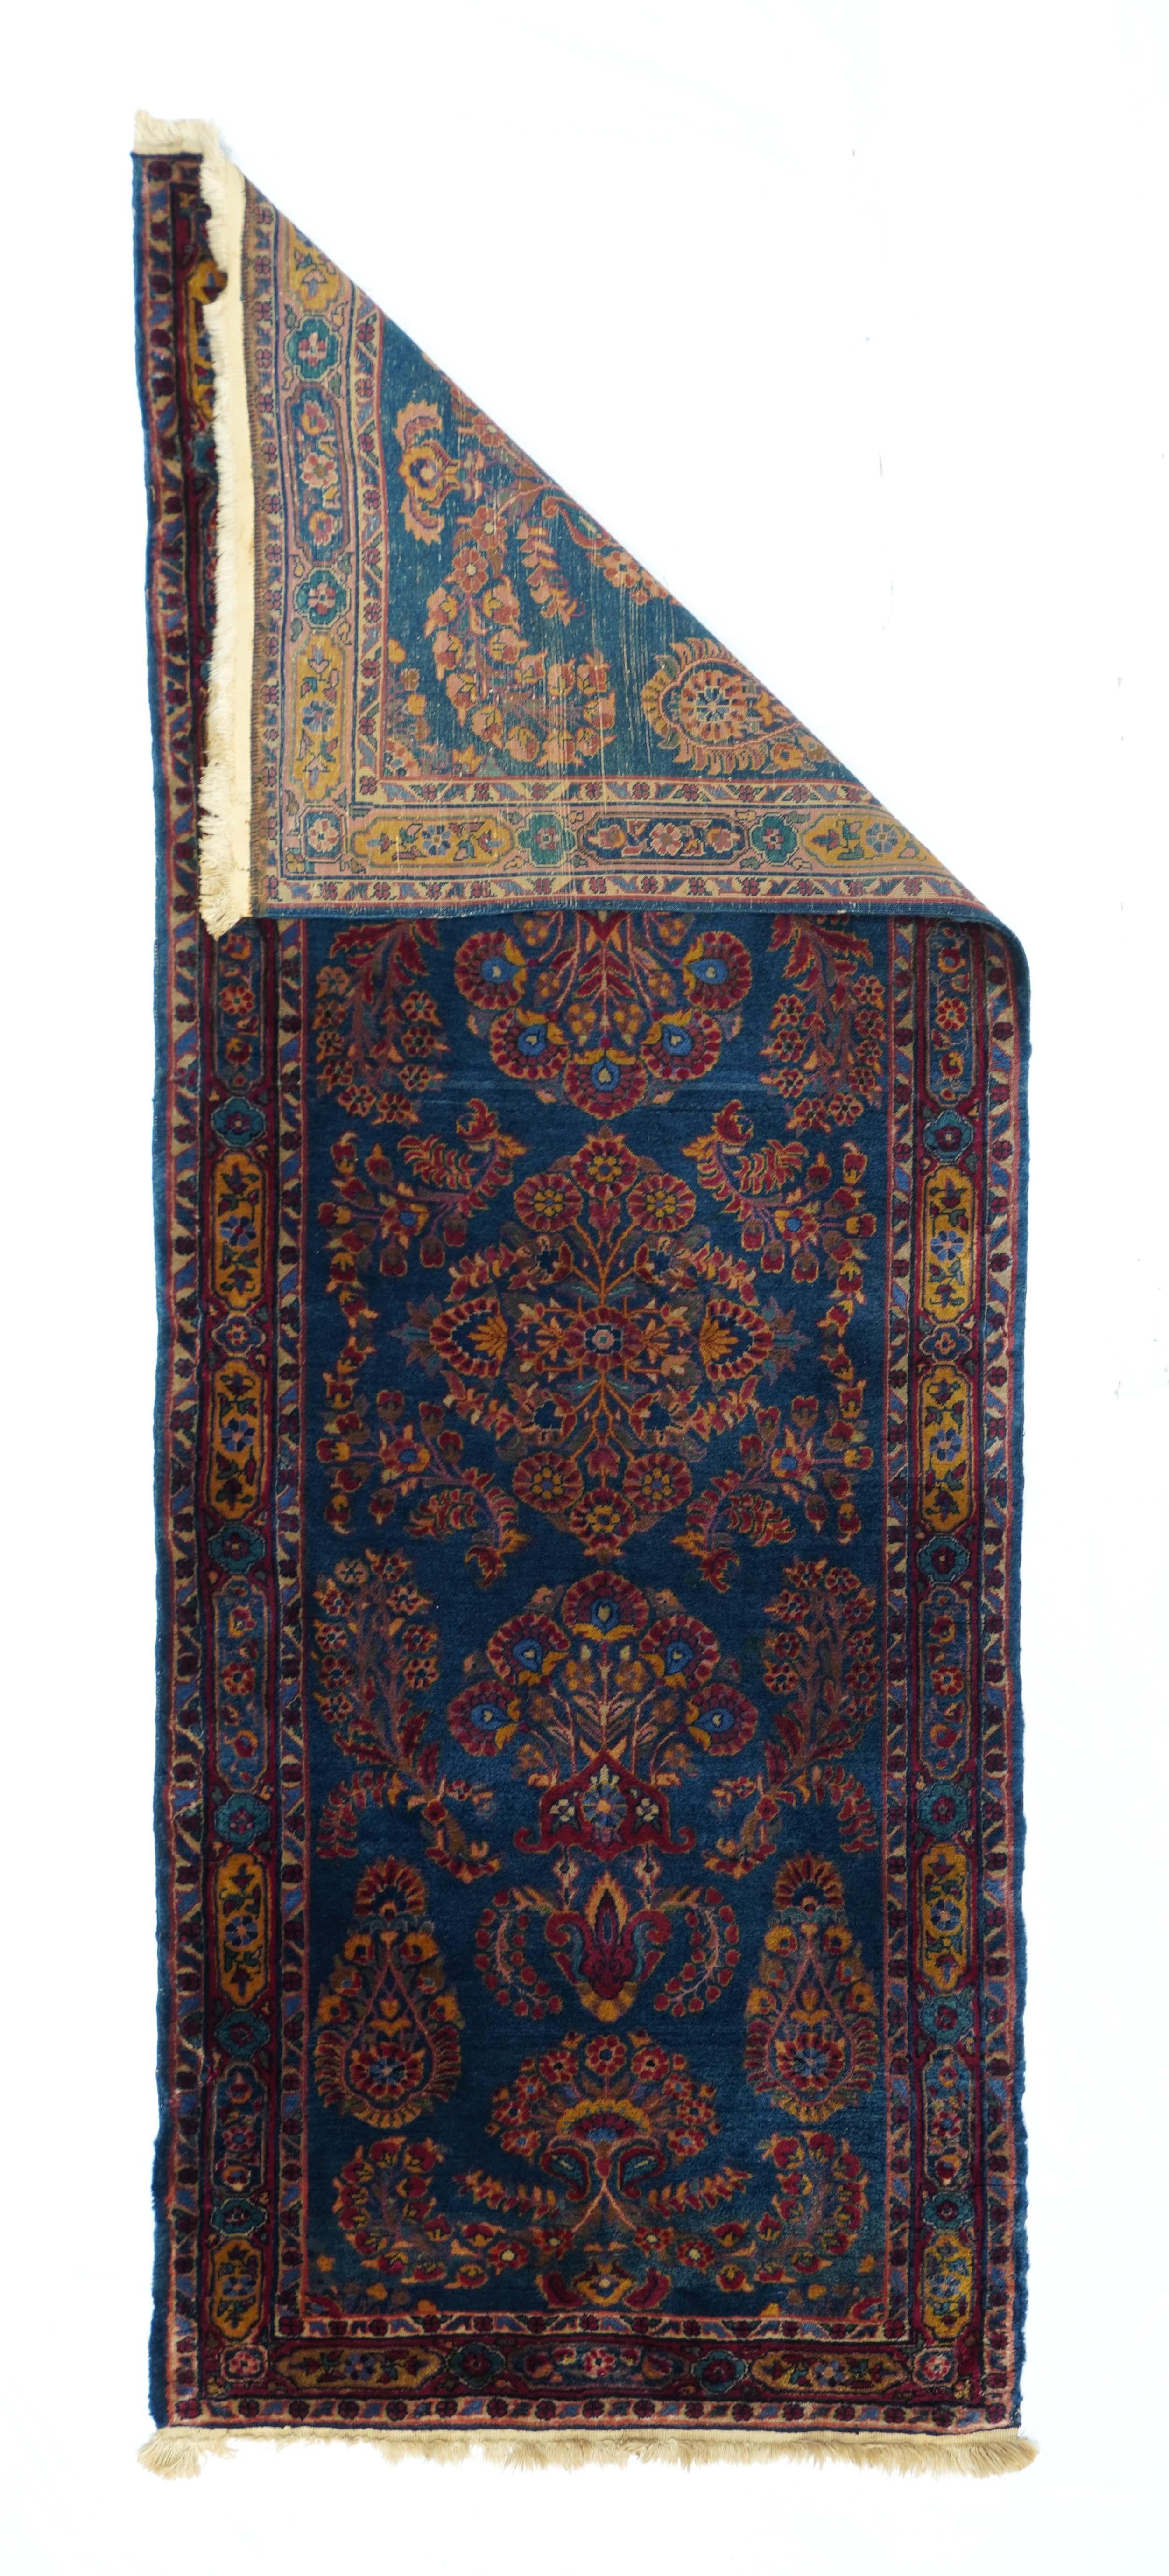 Antique Sarouk rug. This west Persian village piece shows an unusual abrashed royal blue field adorned with the detached floral spray pattern common to interwar 